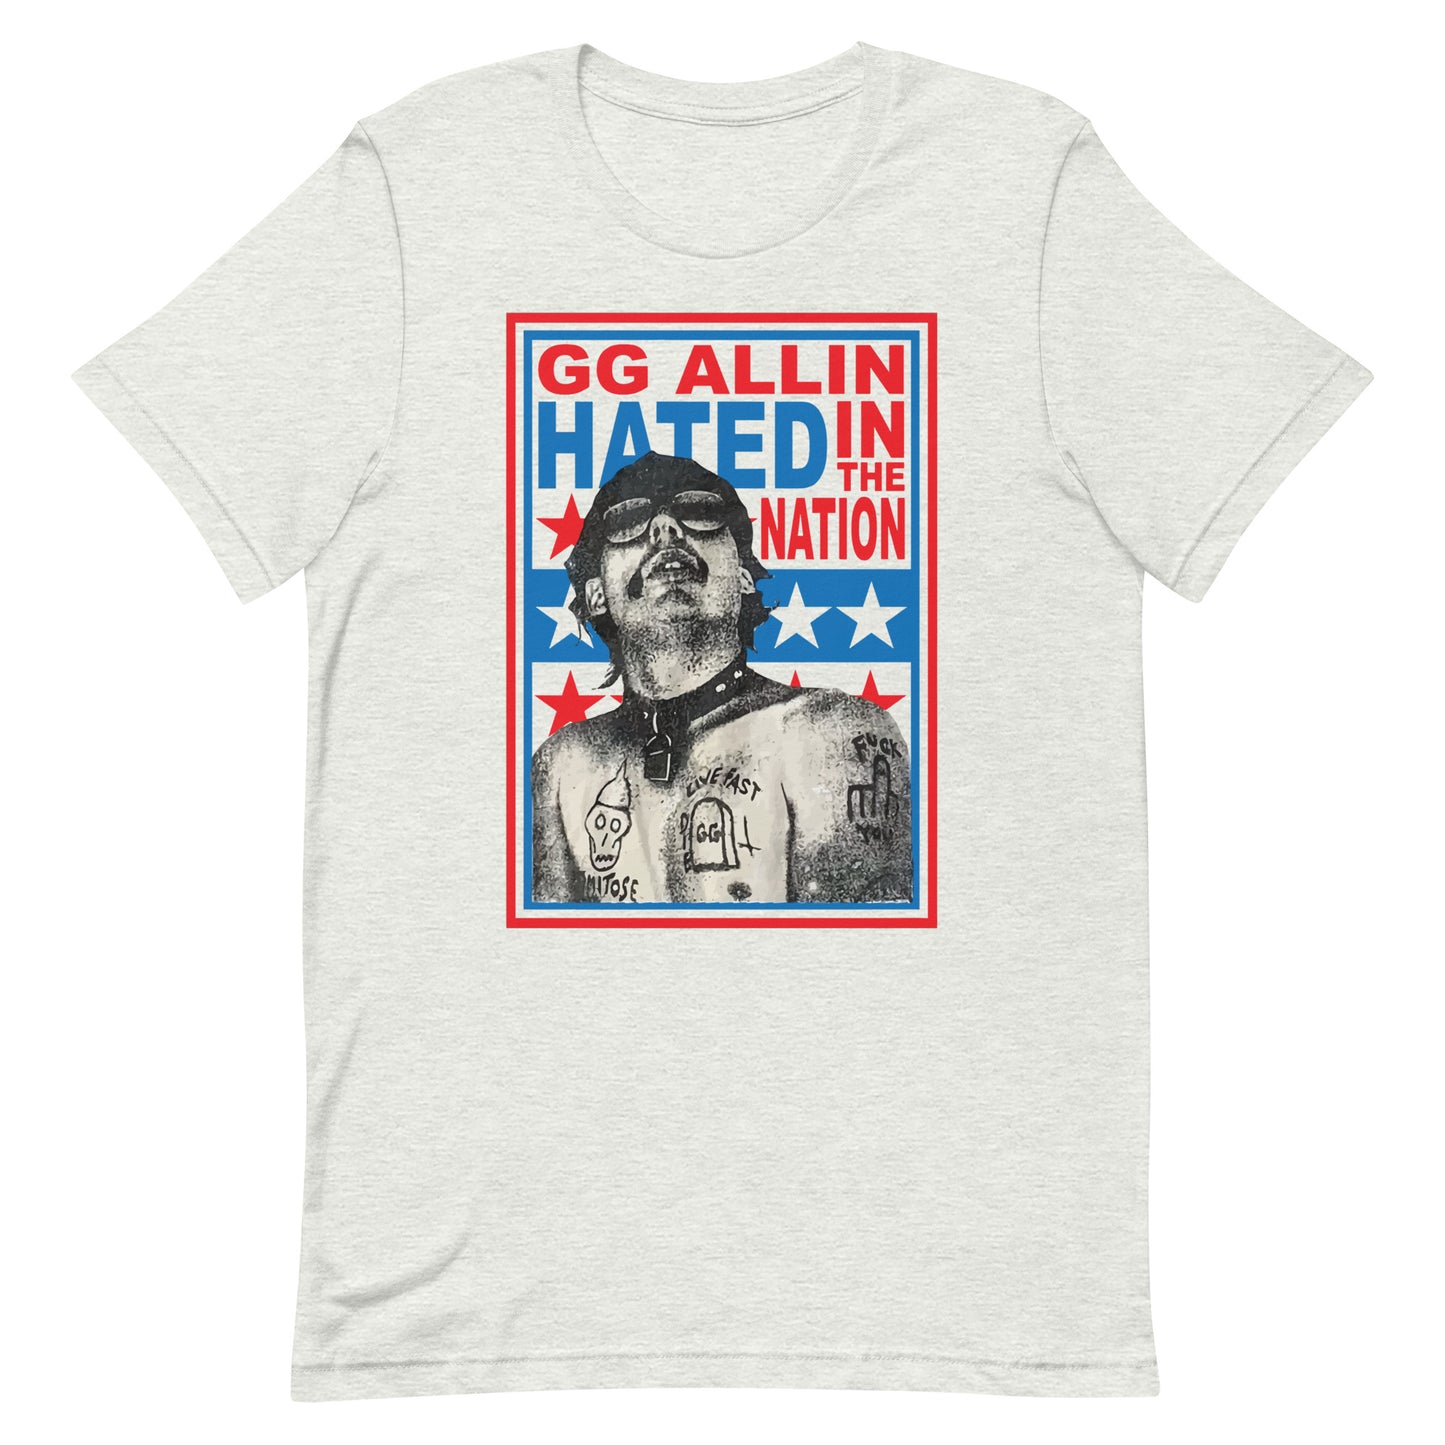 GG Allin - Hated In The Nation T-Shirt